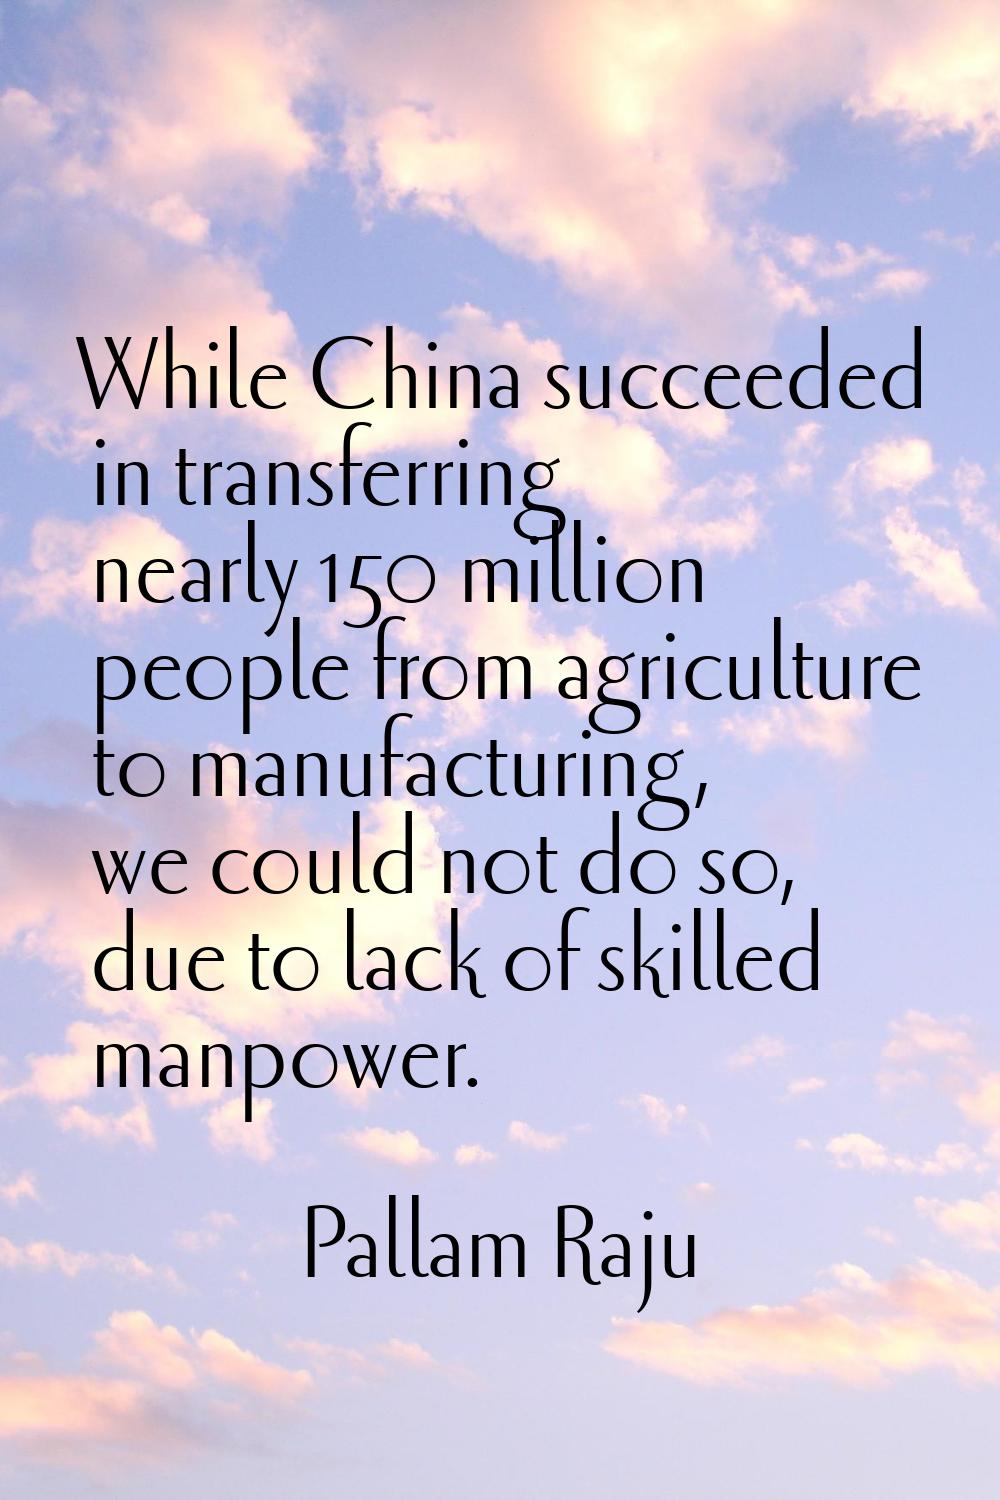 While China succeeded in transferring nearly 150 million people from agriculture to manufacturing, 